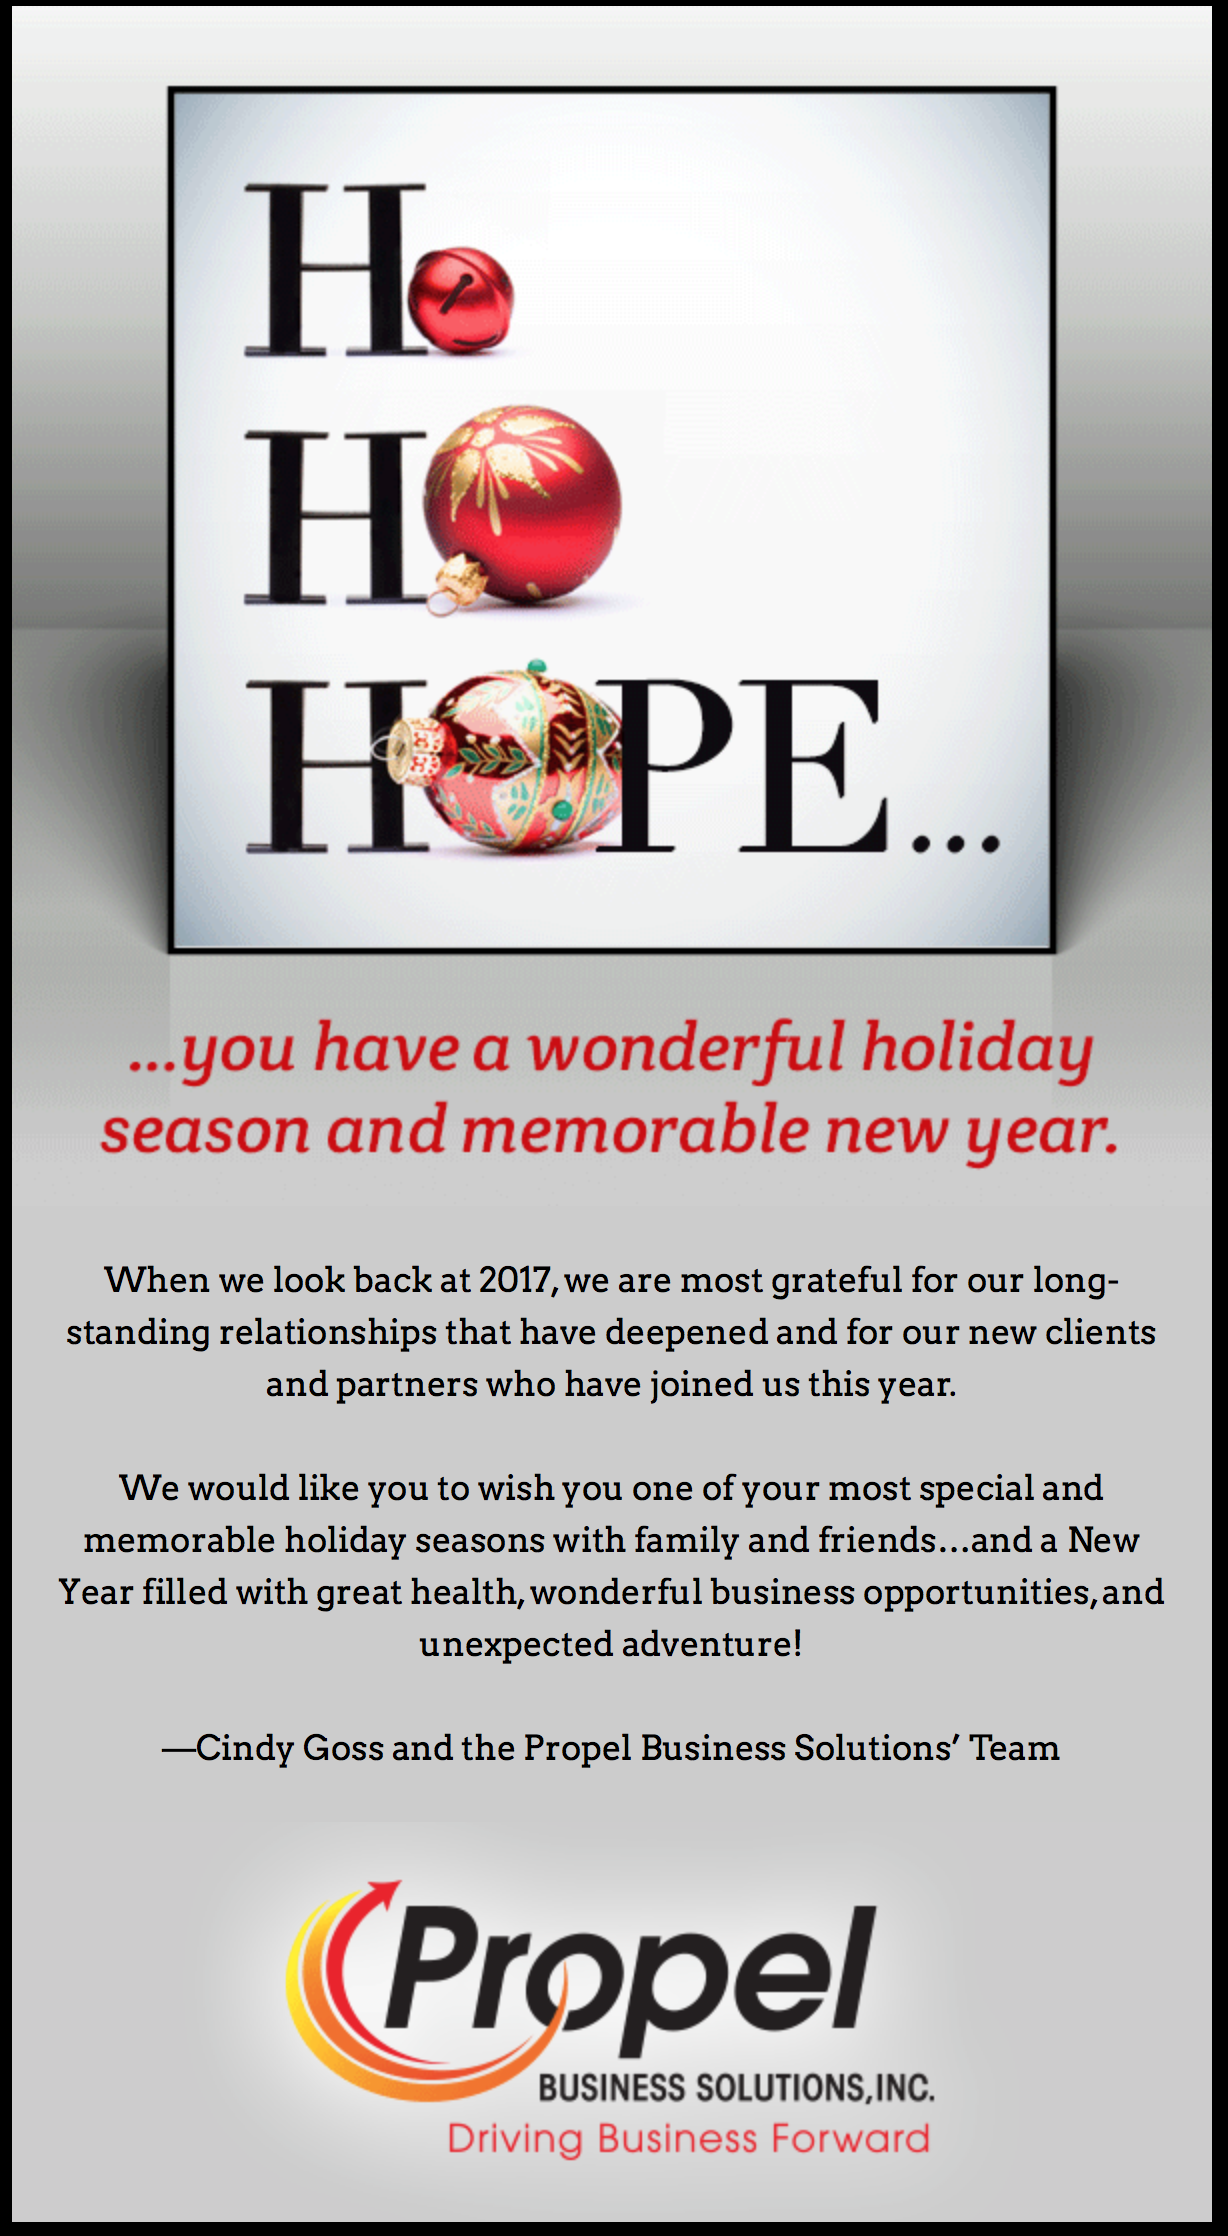 Happy Holidays from Propel Business Solutions